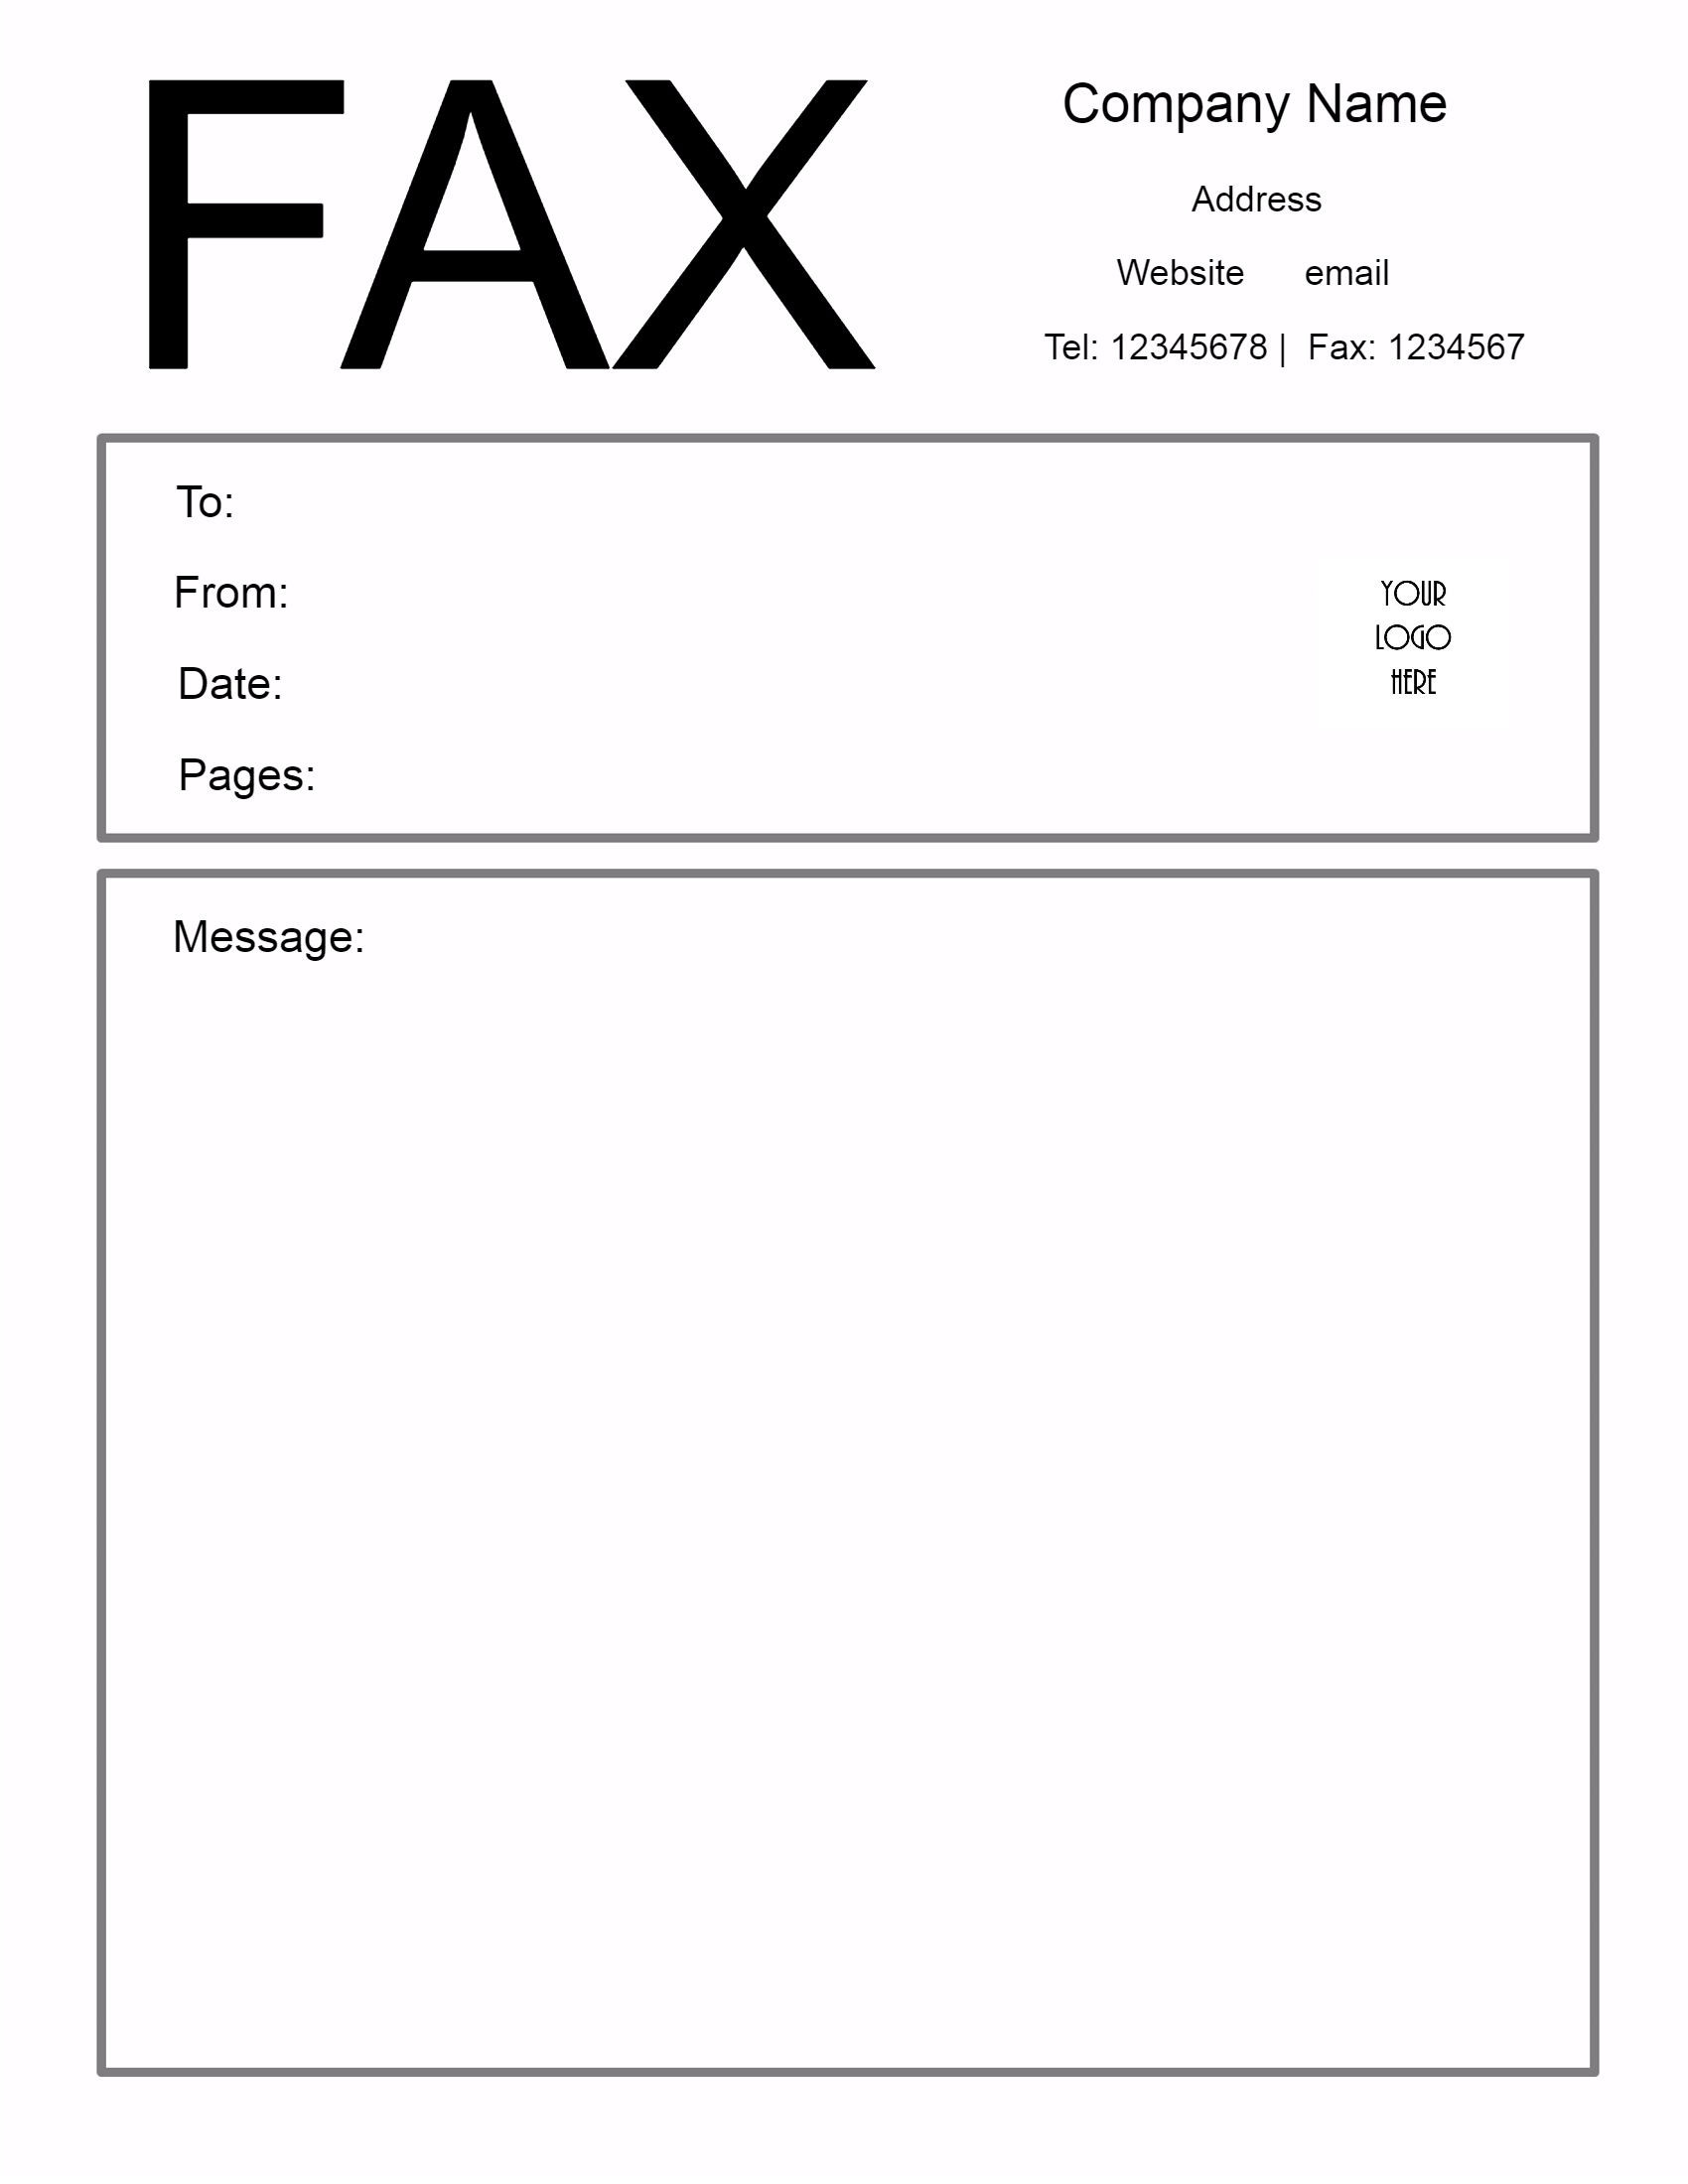 Fax Cover Sheet Template for Resume Free Fax Cover Sheet Template Customize Online then Print